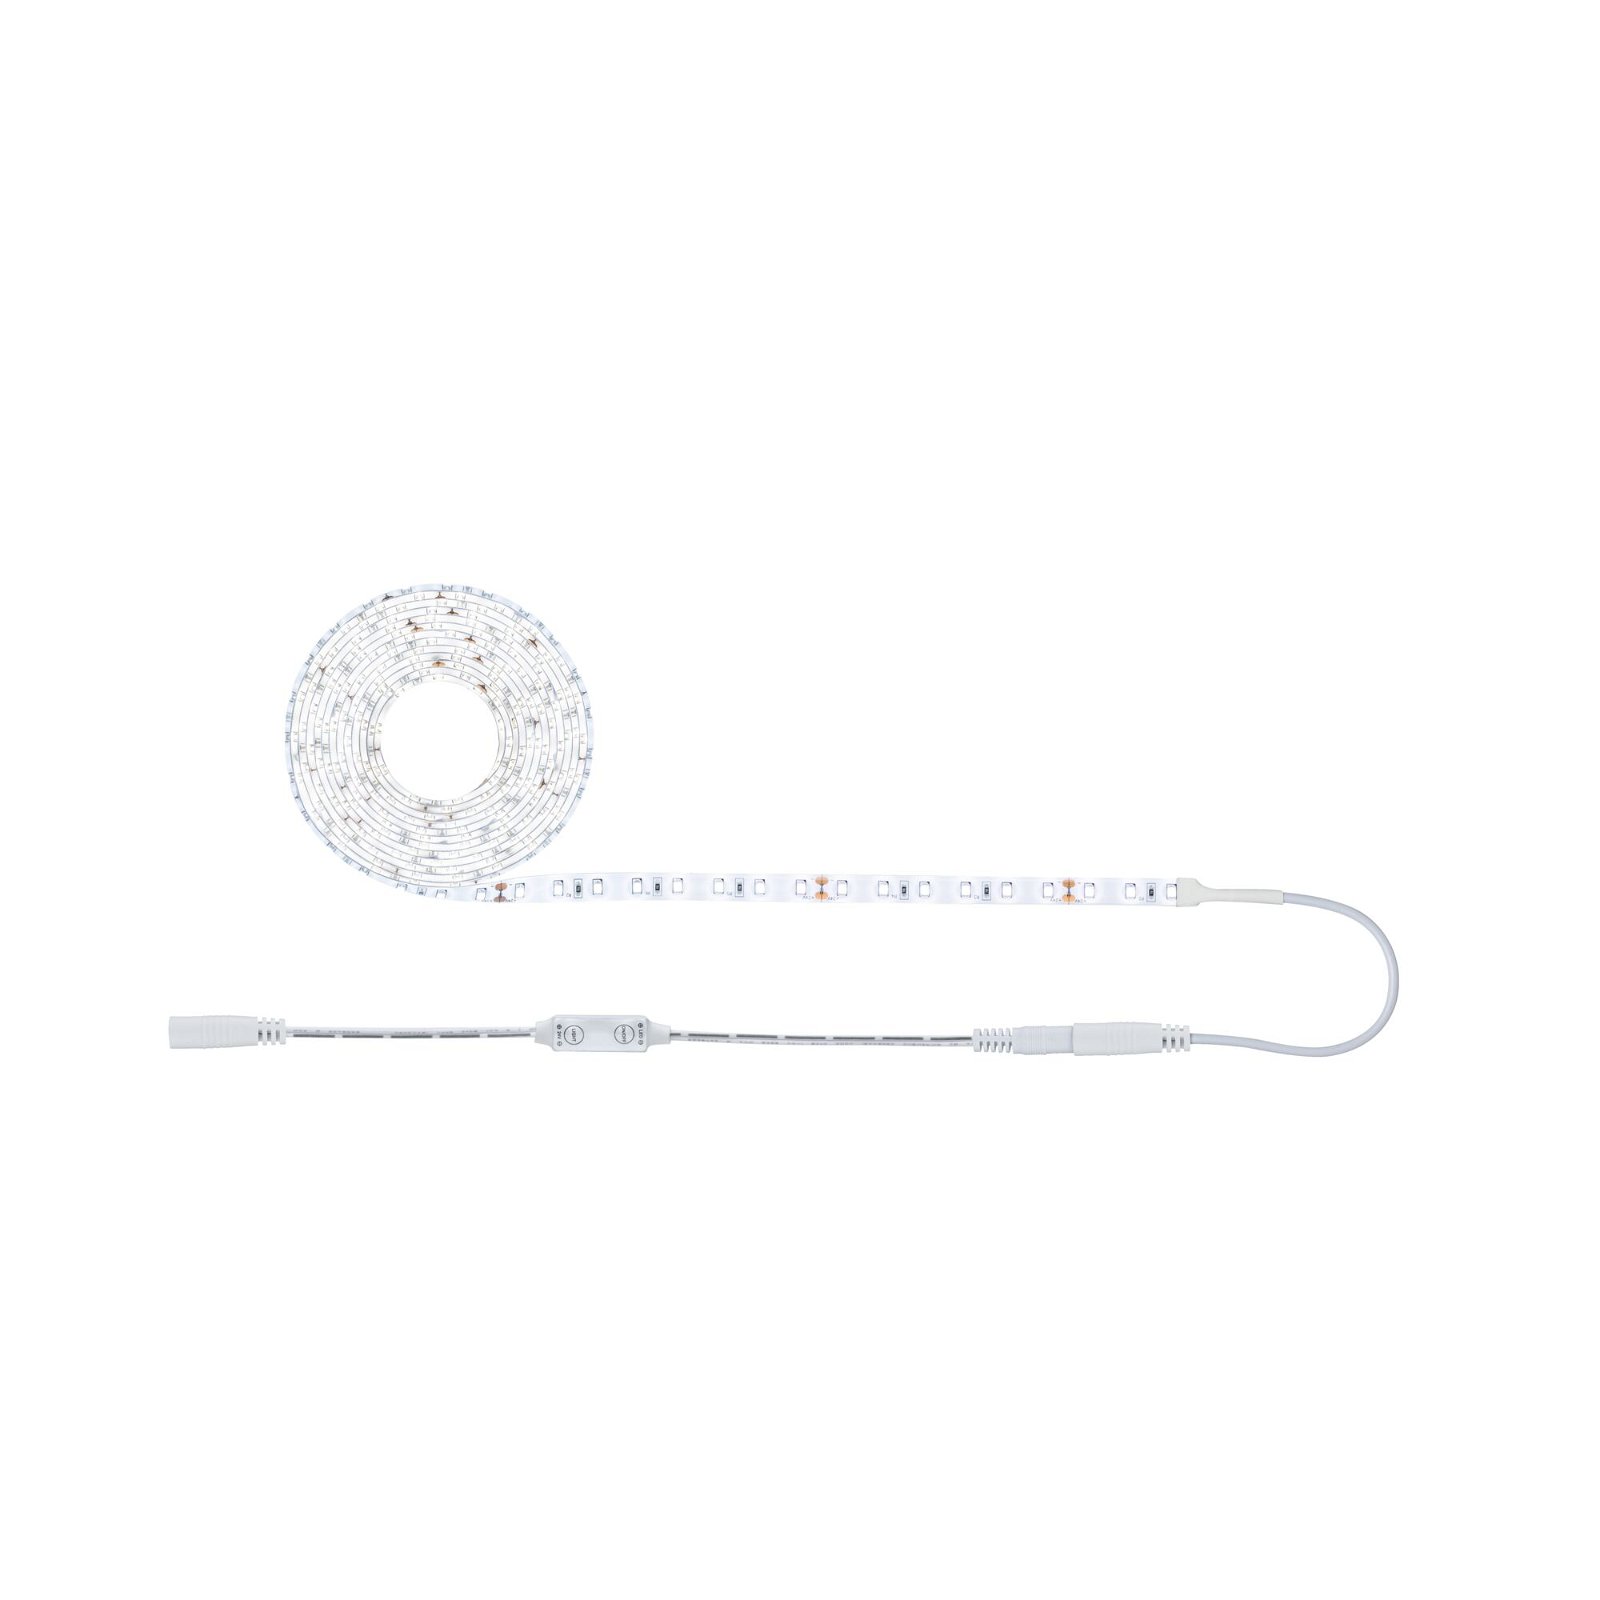 SimpLED Power LED set 1060lm/ Neutral 33W Strip Dimm/Switch 3m protect white cover Complete incl